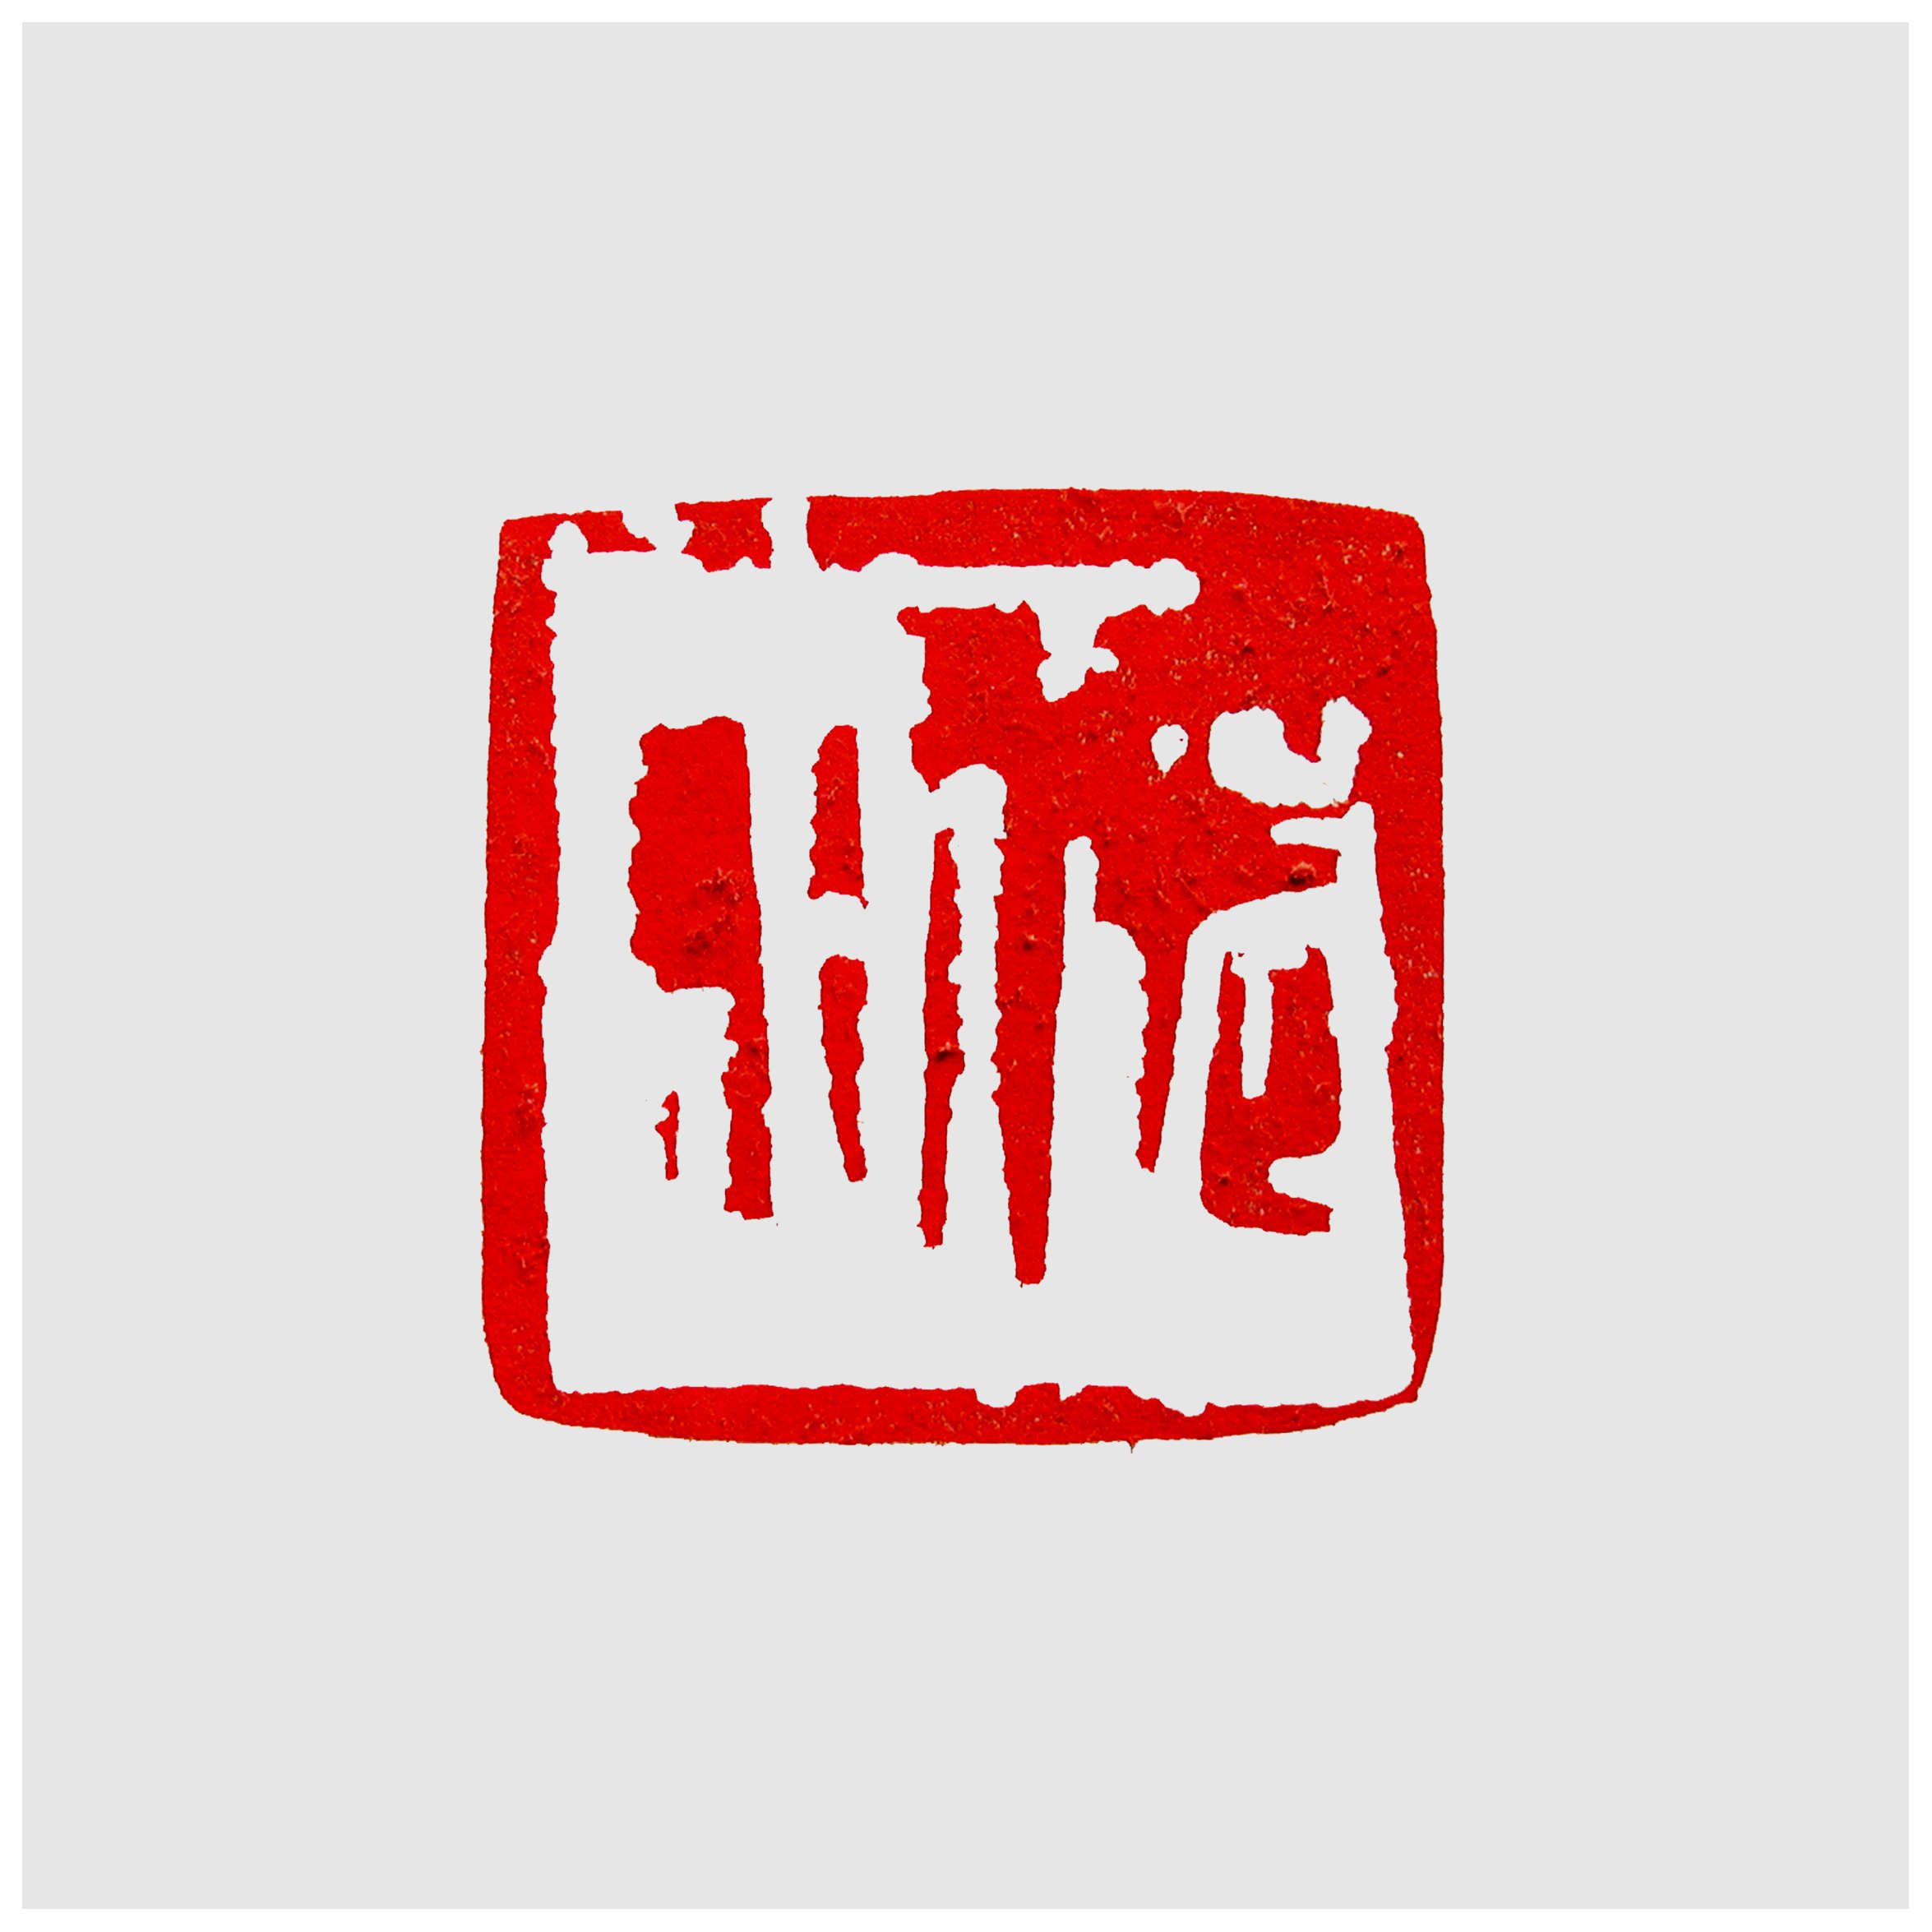 Sai Koh (Qi Hong)’s freehand brushwork Chinese seal carving (Chinese seal engraving, Chinese seal cutting) – A Personal Name Seal “Deshui”, 55×55mm, the active surface of the Qingtian stone seal carved in relief with red Chinese characters imprint